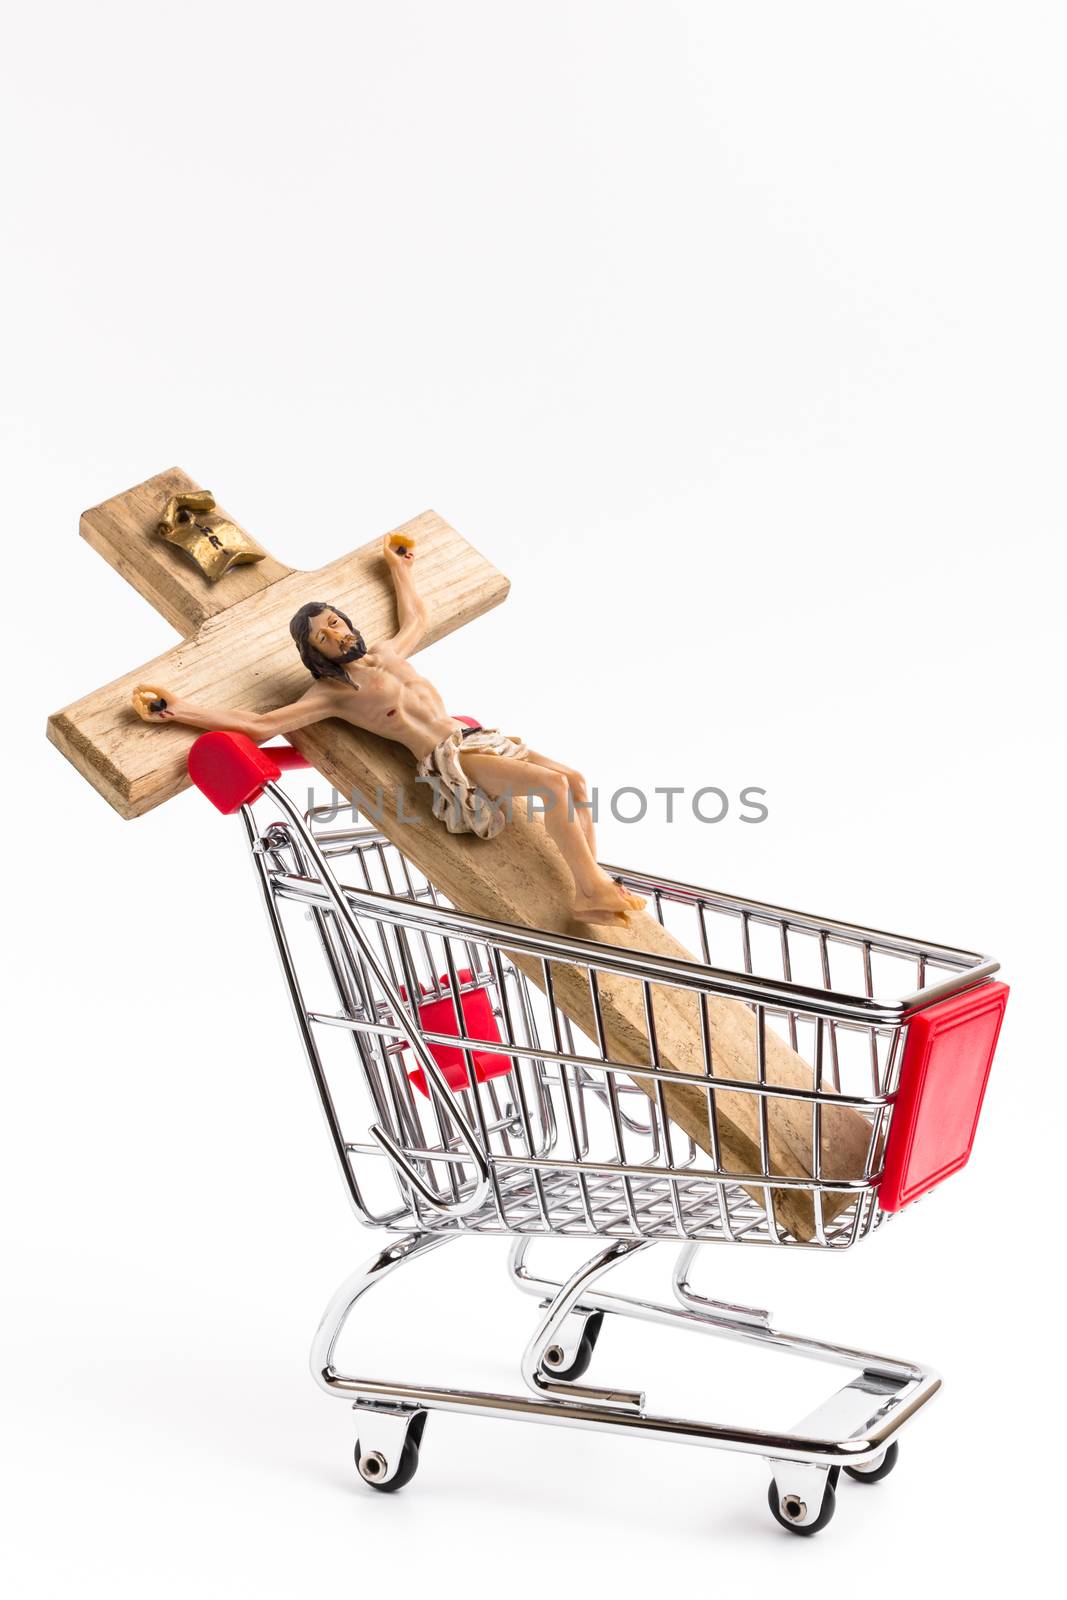 Crucifix in shopping cart. Conceptual representation of commodification of religion, loss of faith, blasphemy.